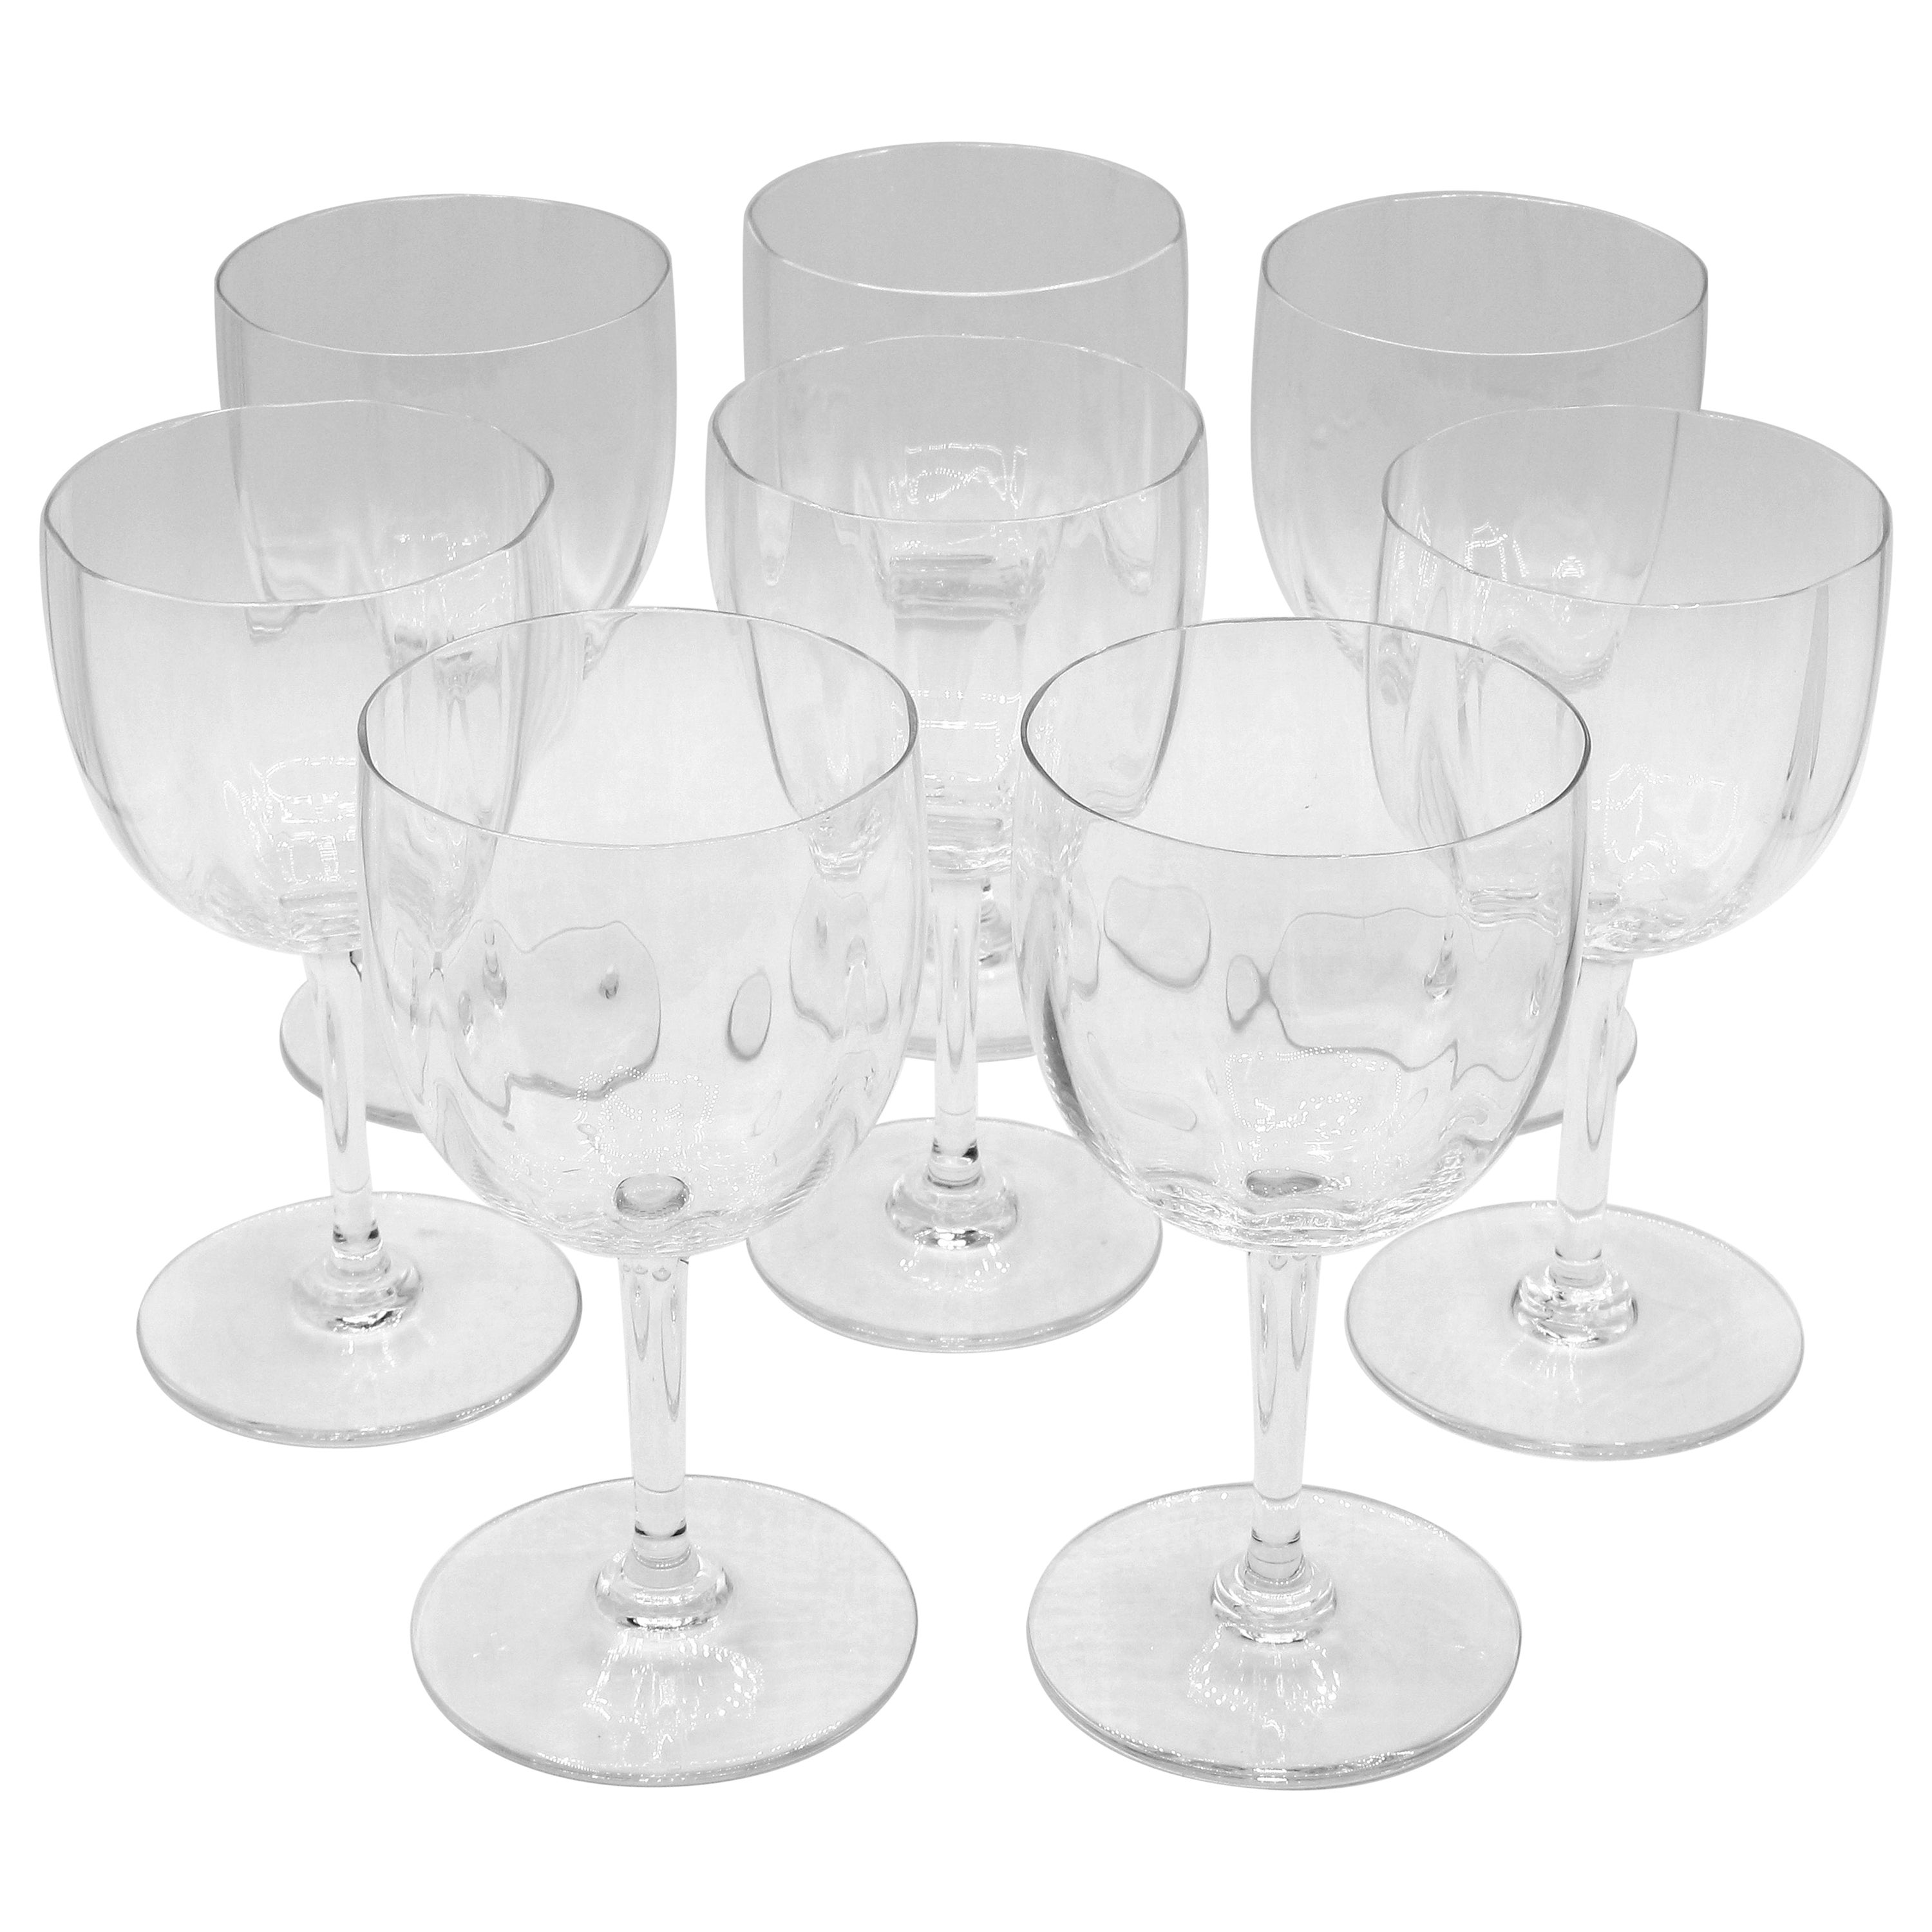 Set of 8 Baccarat Montaigne Optic Red Wines or Water Goblets